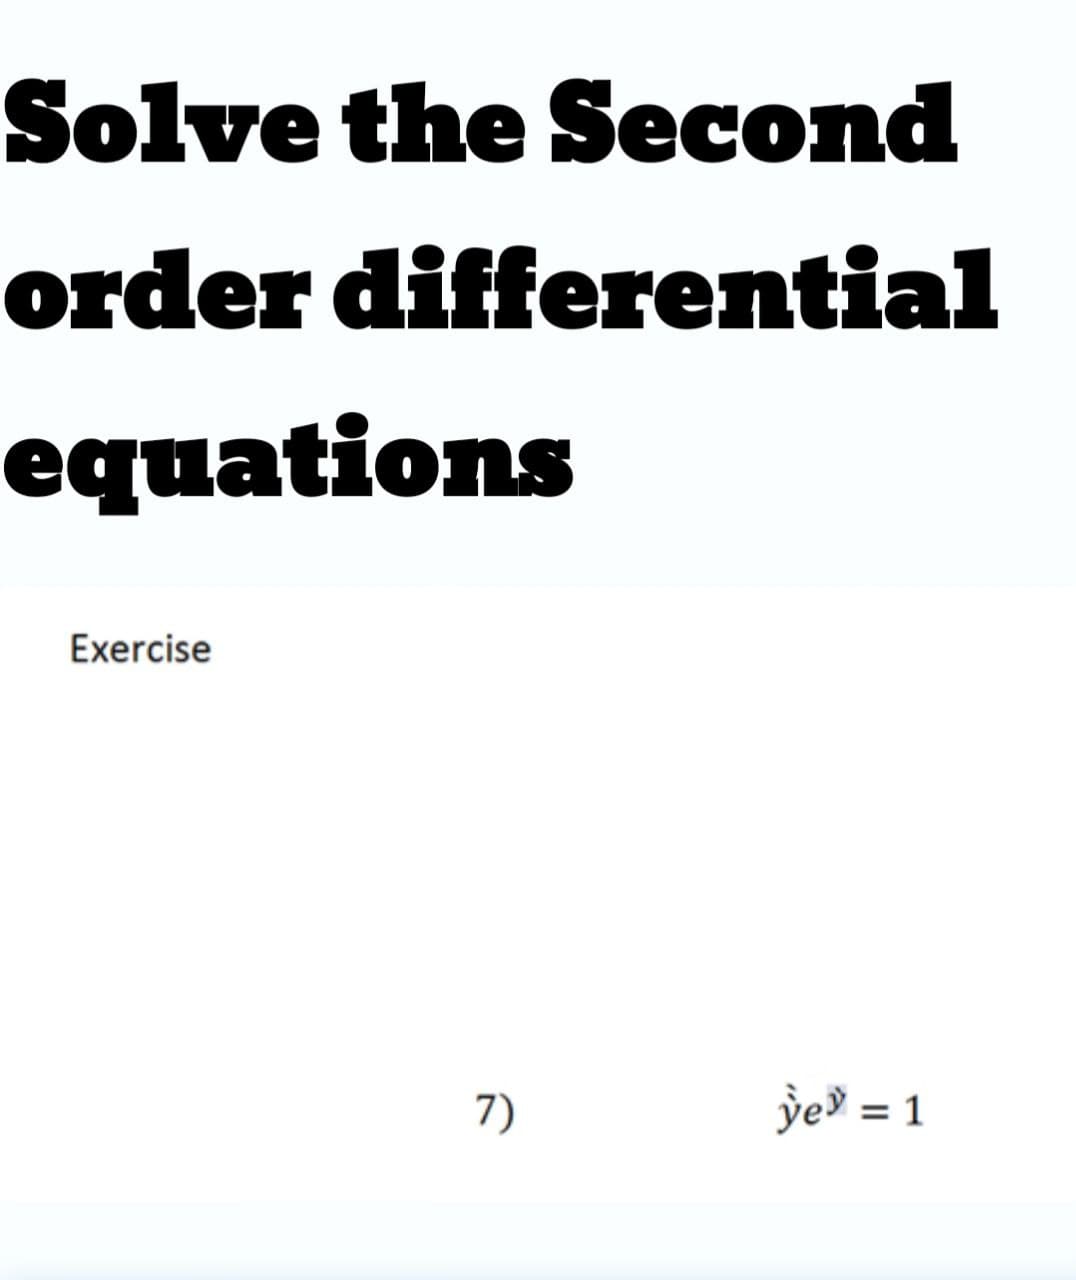 Solve the Sесond
order differential
equations
Exercise
7)
ỳe' = 1
